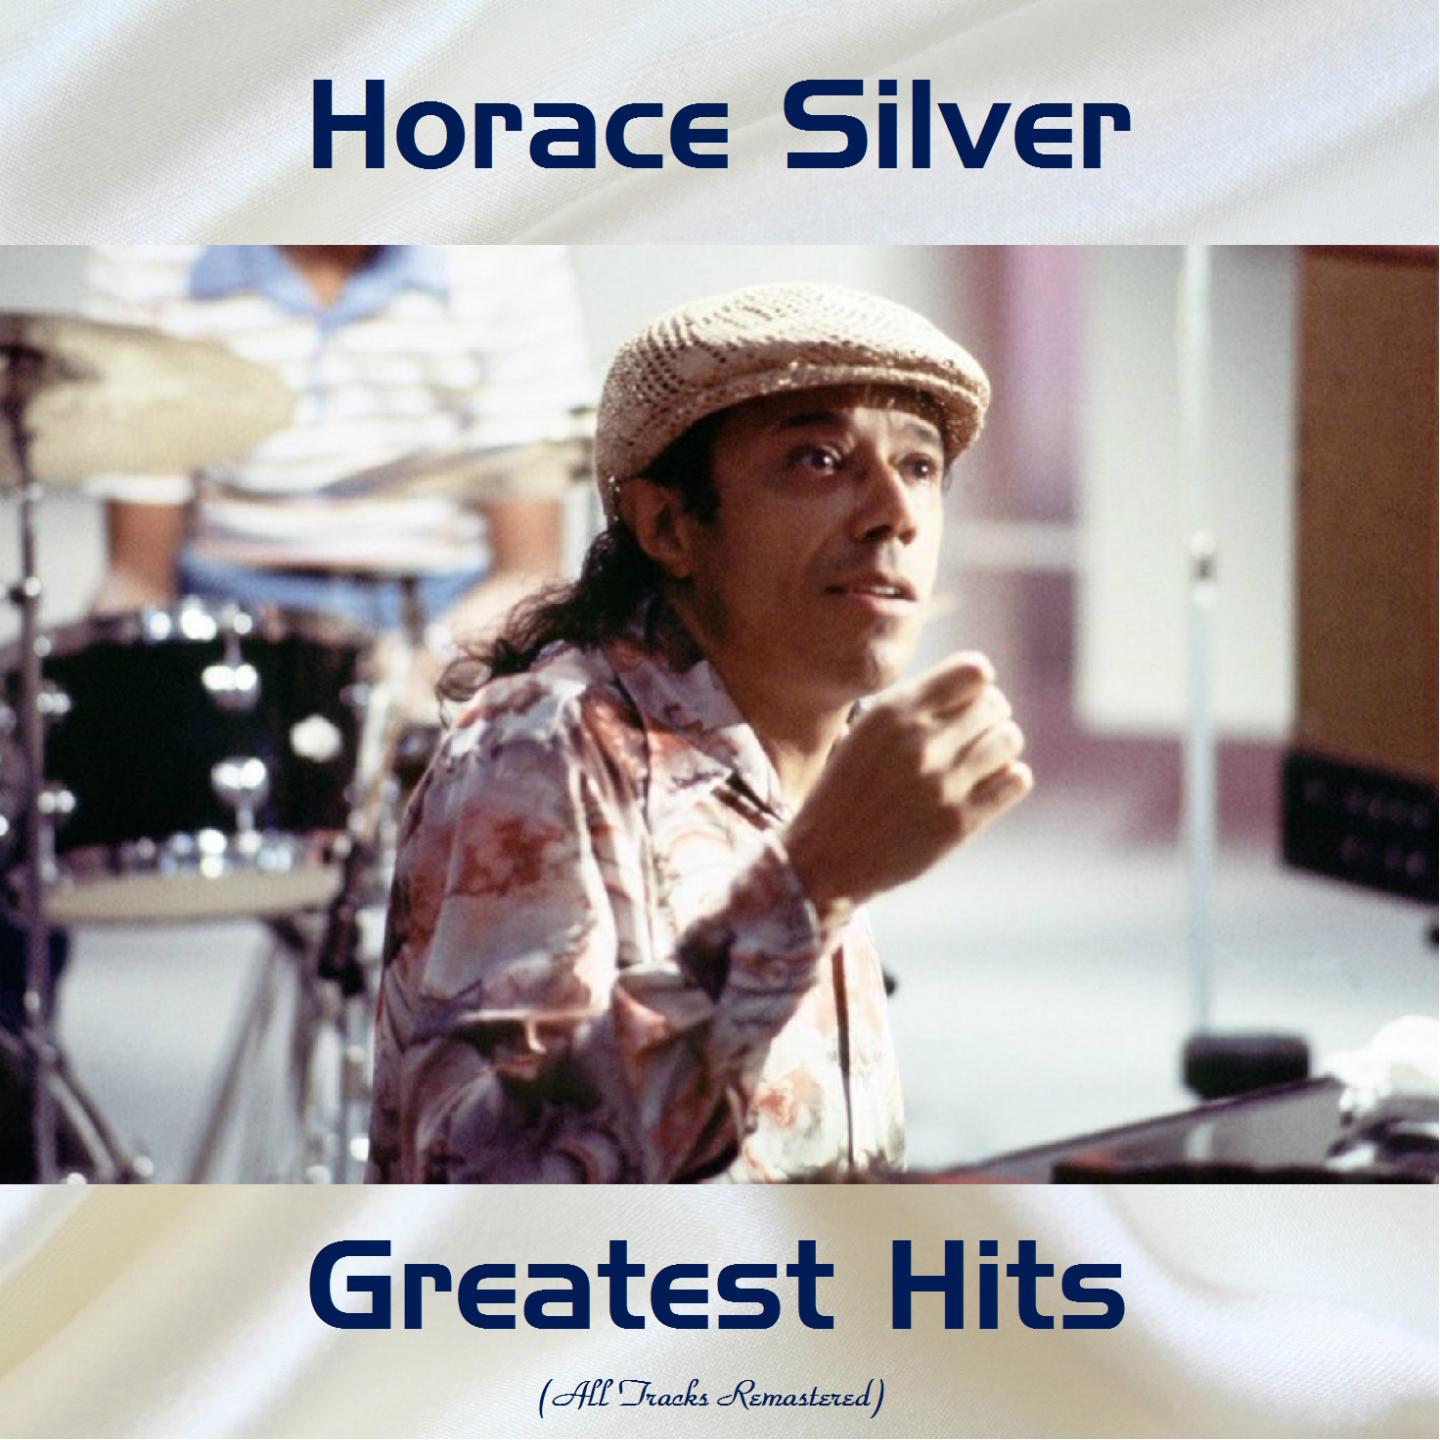 Horace Silver Greatest Hits (All Tracks Remastered)